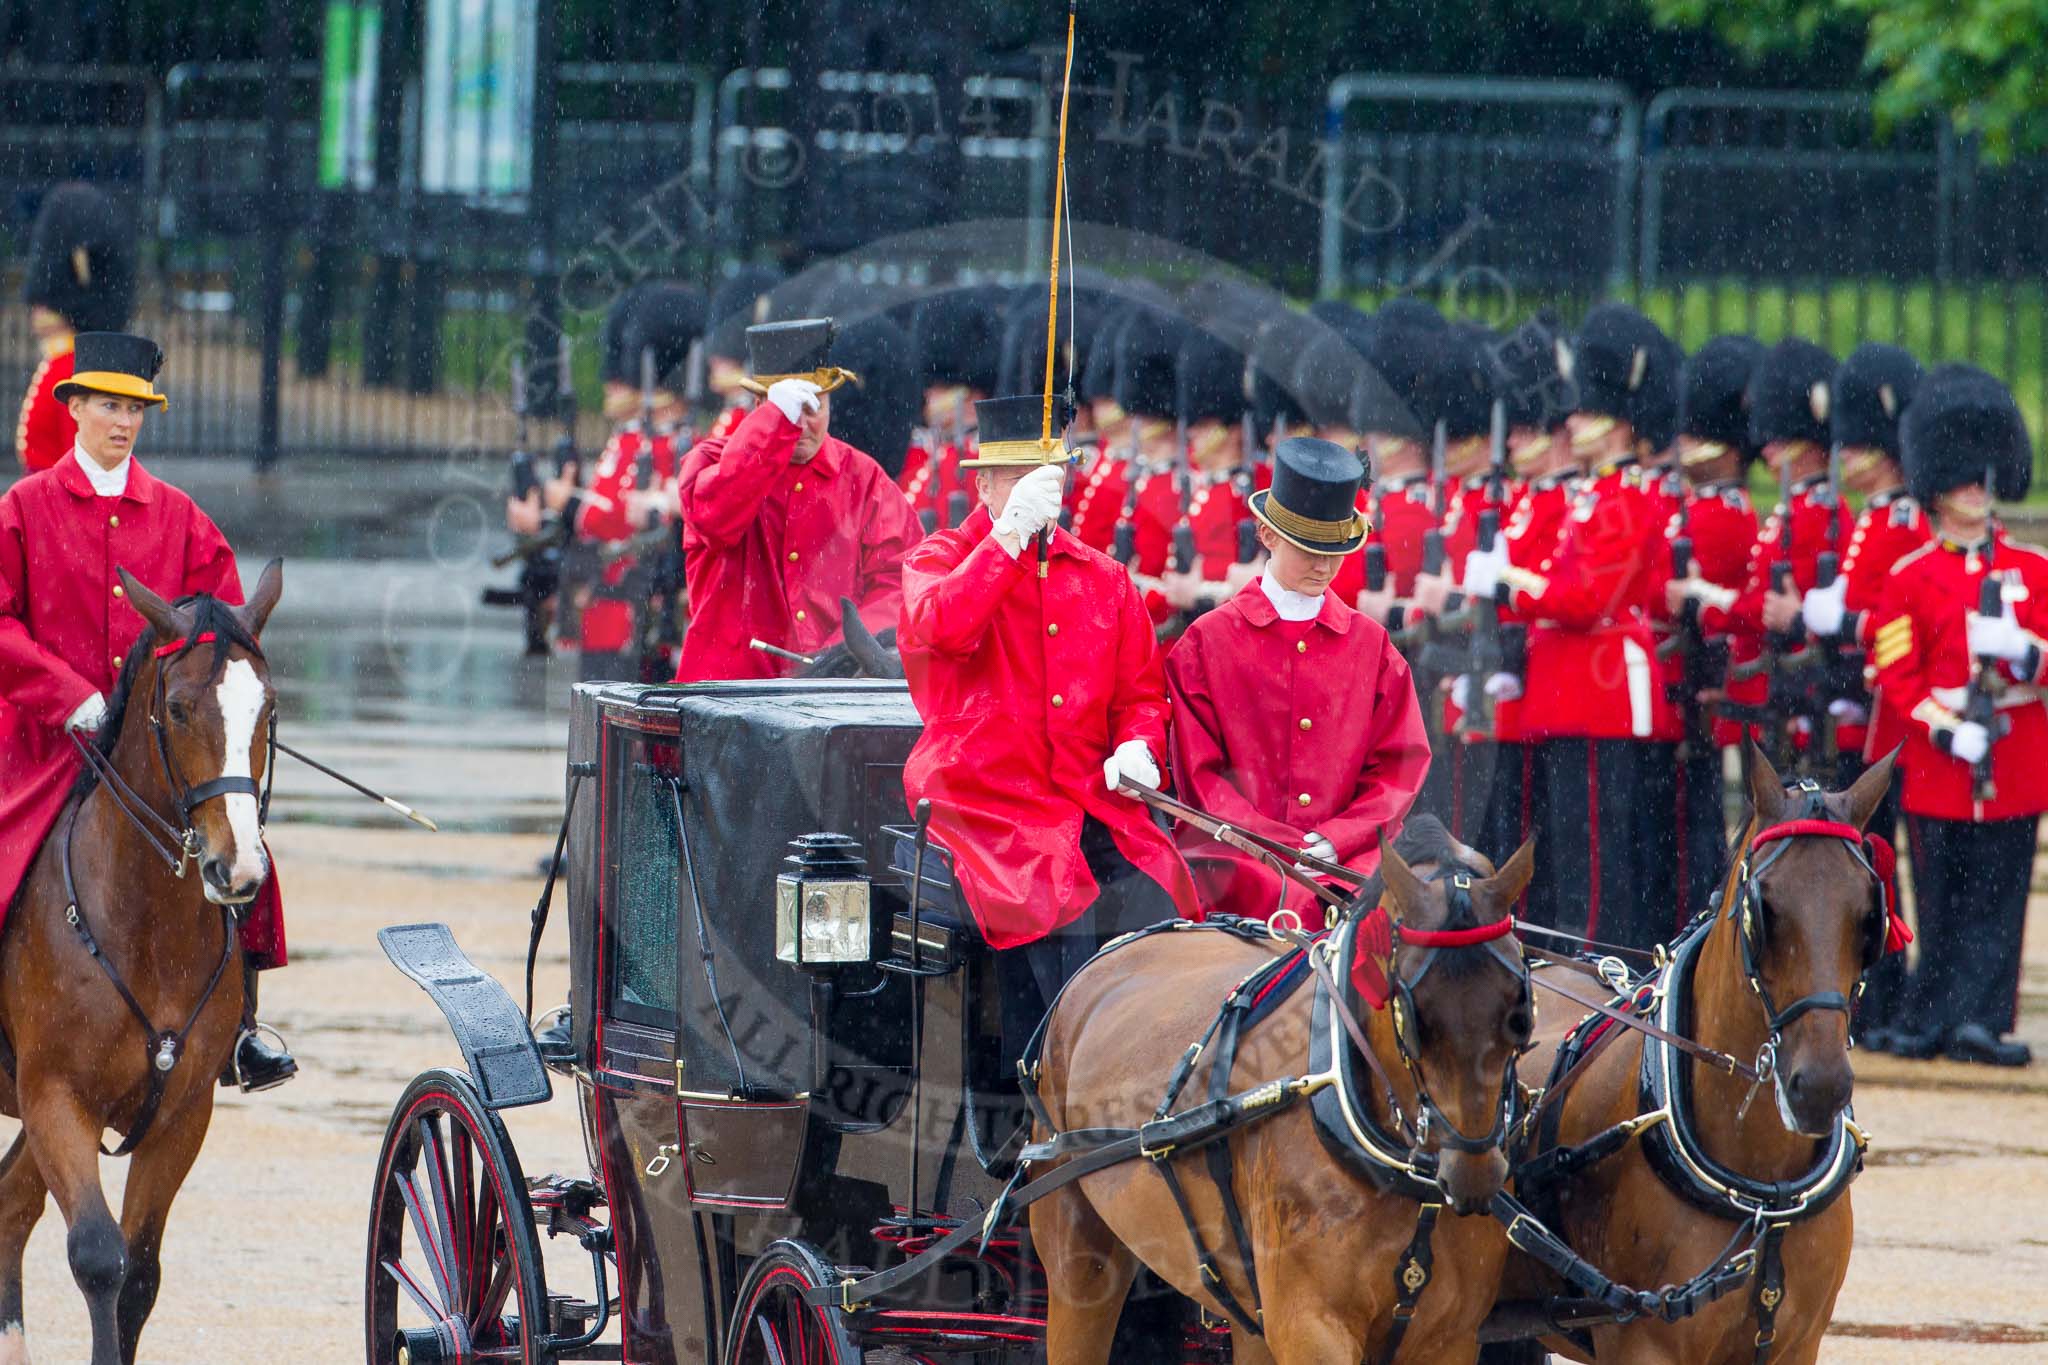 The Colonel's Review 2014.
Horse Guards Parade, Westminster,
London,

United Kingdom,
on 07 June 2014 at 10:51, image #208